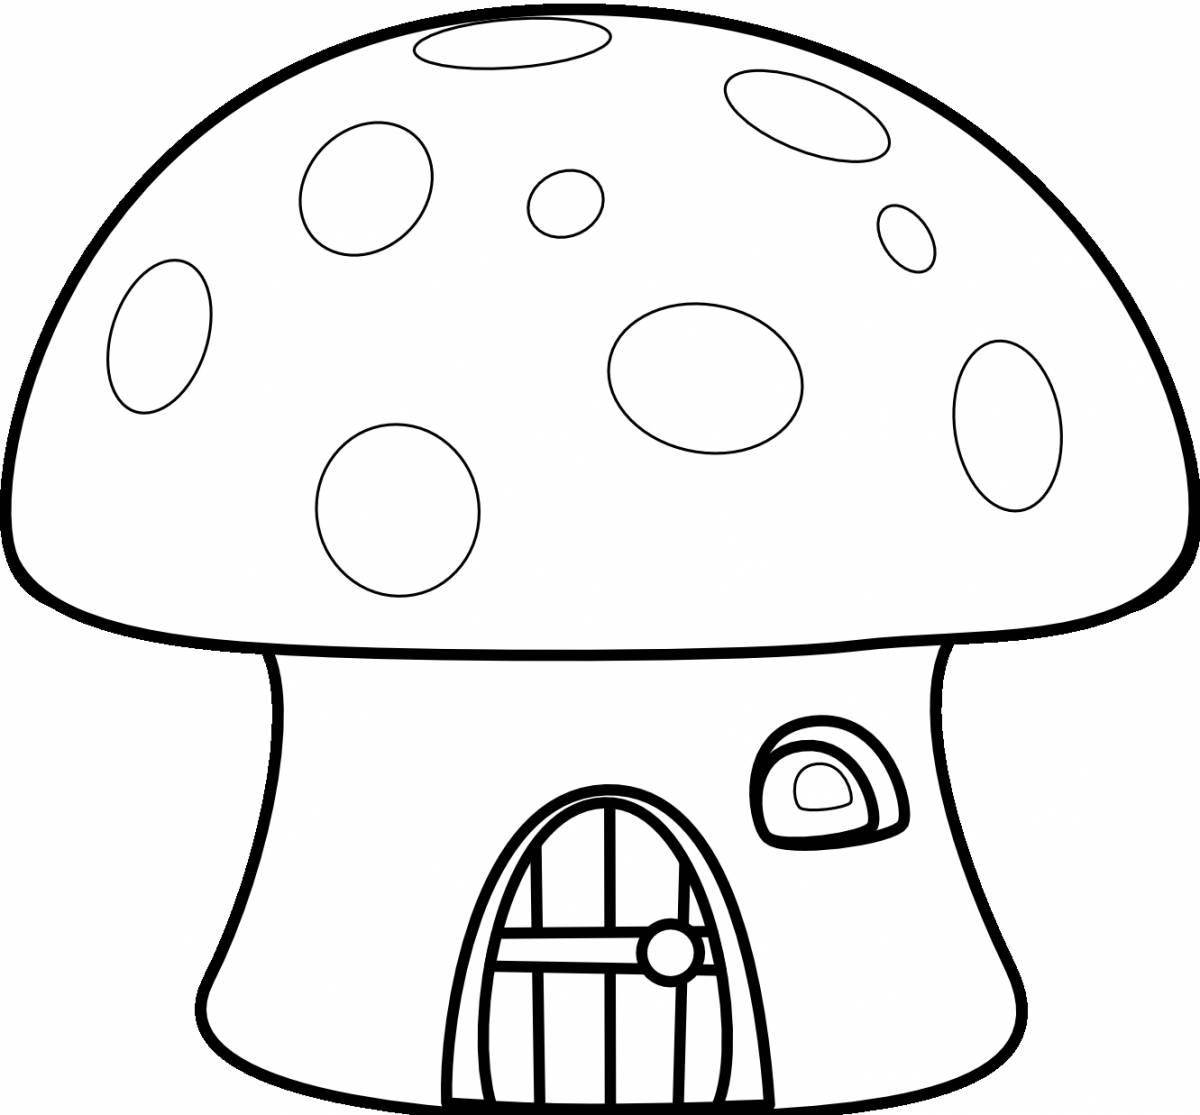 Amazing fungus coloring book for 3-4 year olds